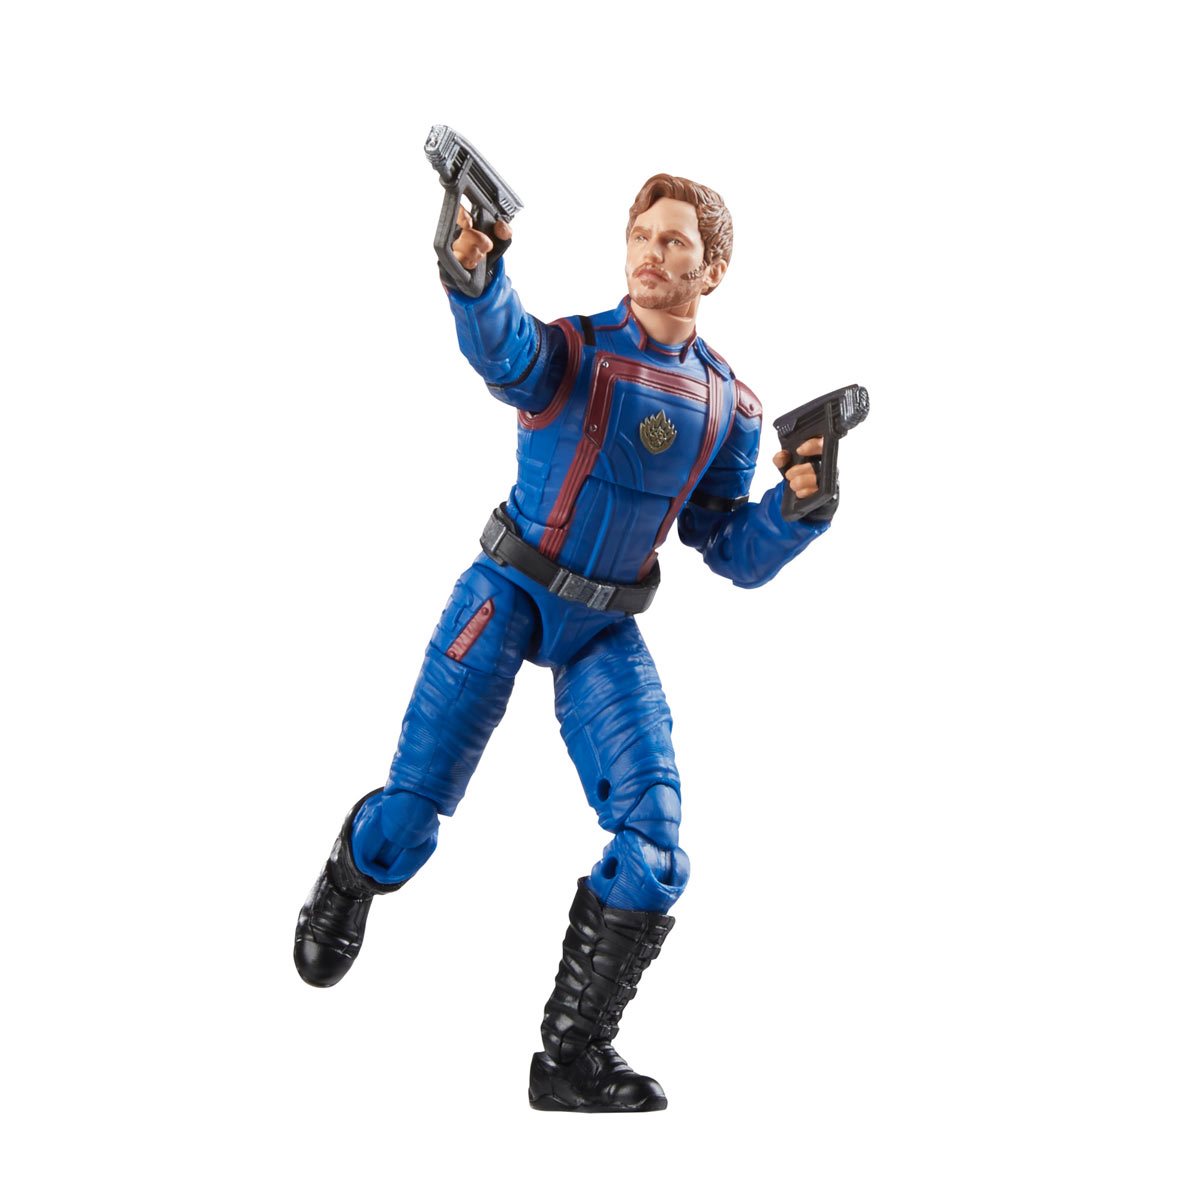 Guardians of the Galaxy Vol. 3 Marvel Legends Star-Lord Hasbro